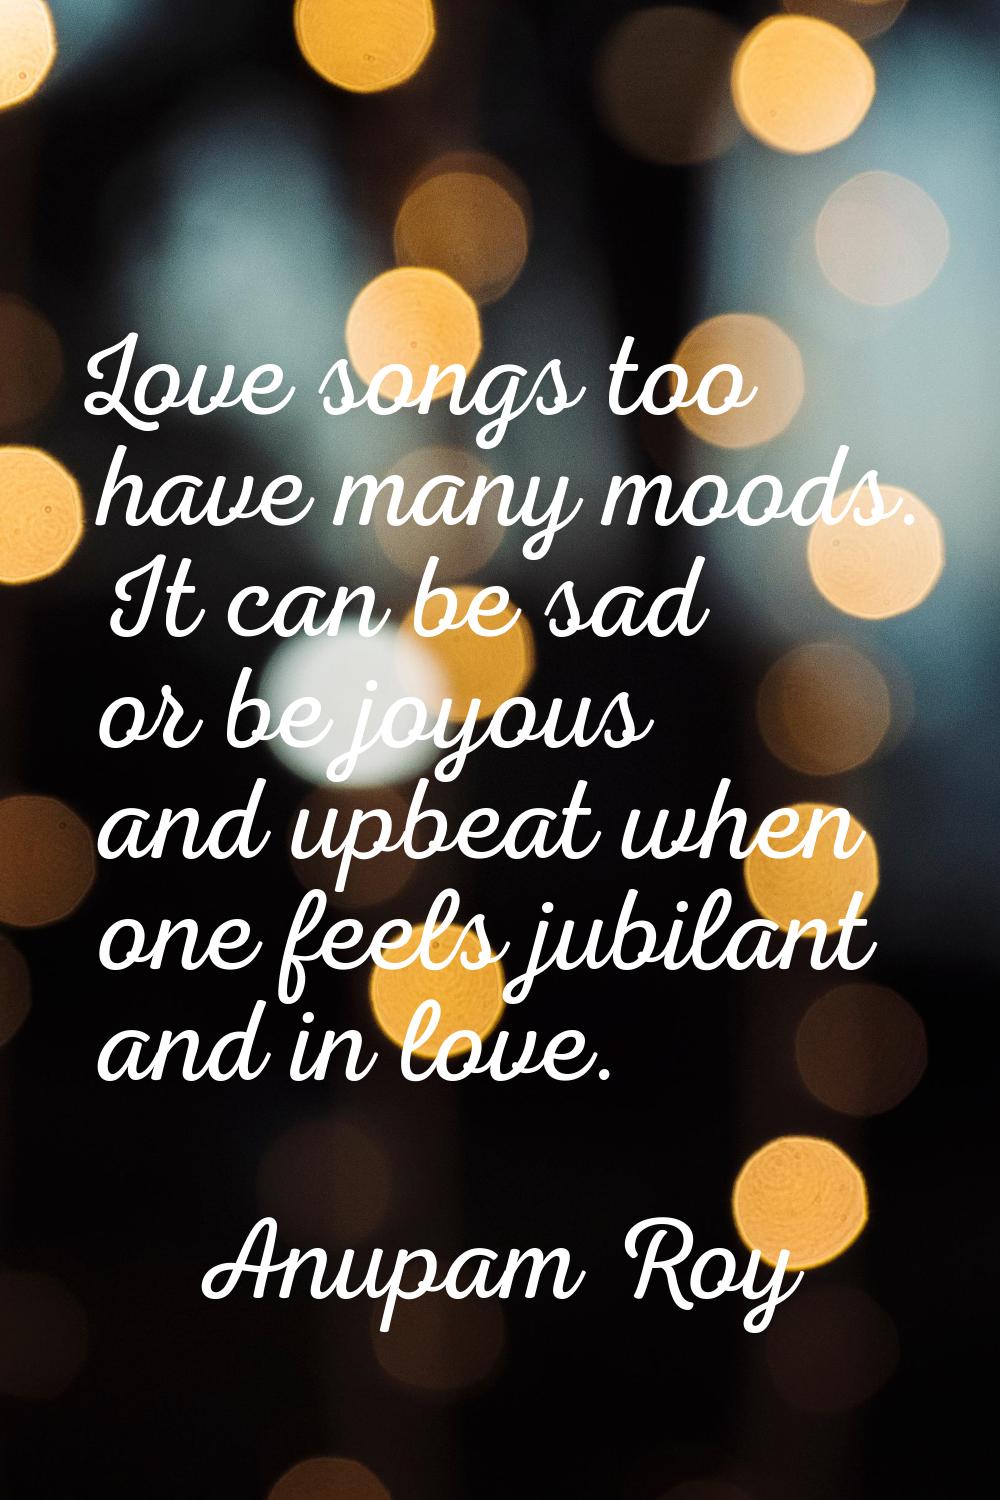 Love songs too have many moods. It can be sad or be joyous and upbeat when one feels jubilant and i